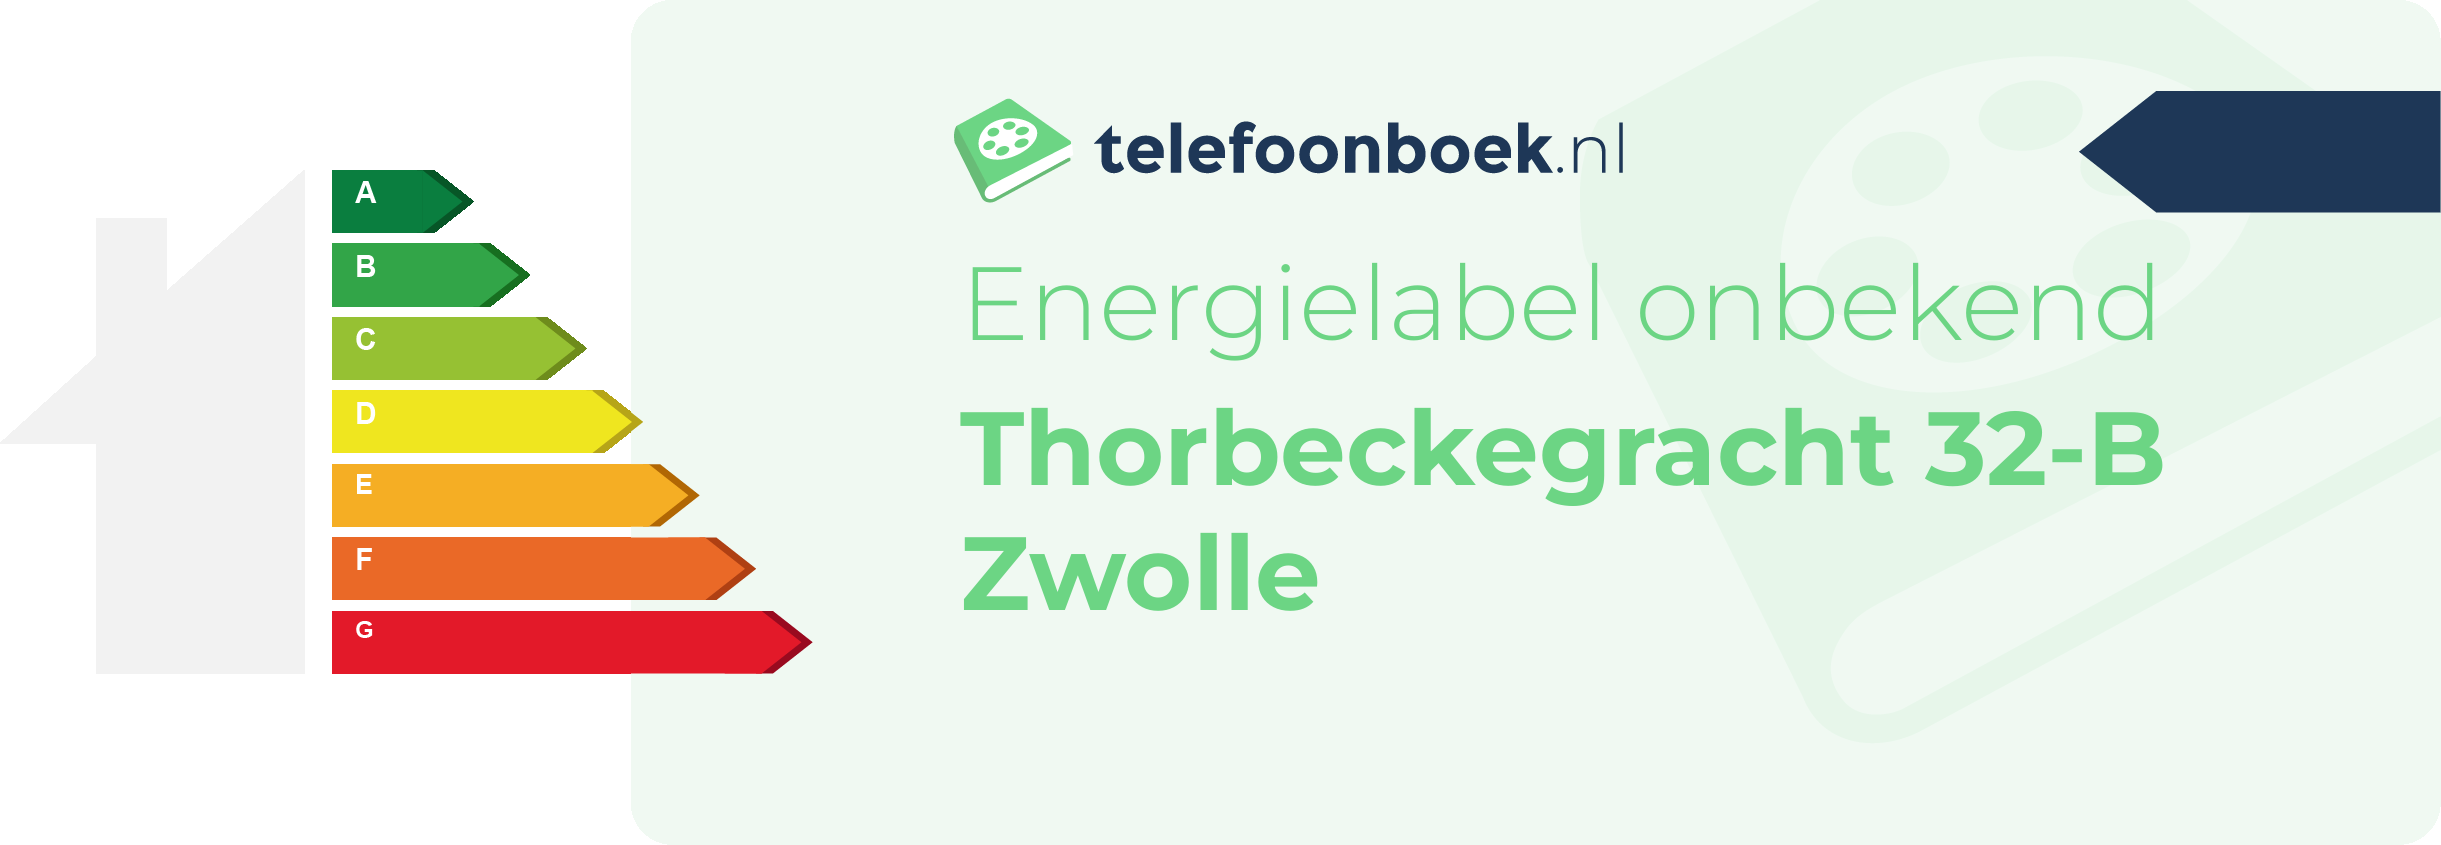 Energielabel Thorbeckegracht 32-B Zwolle